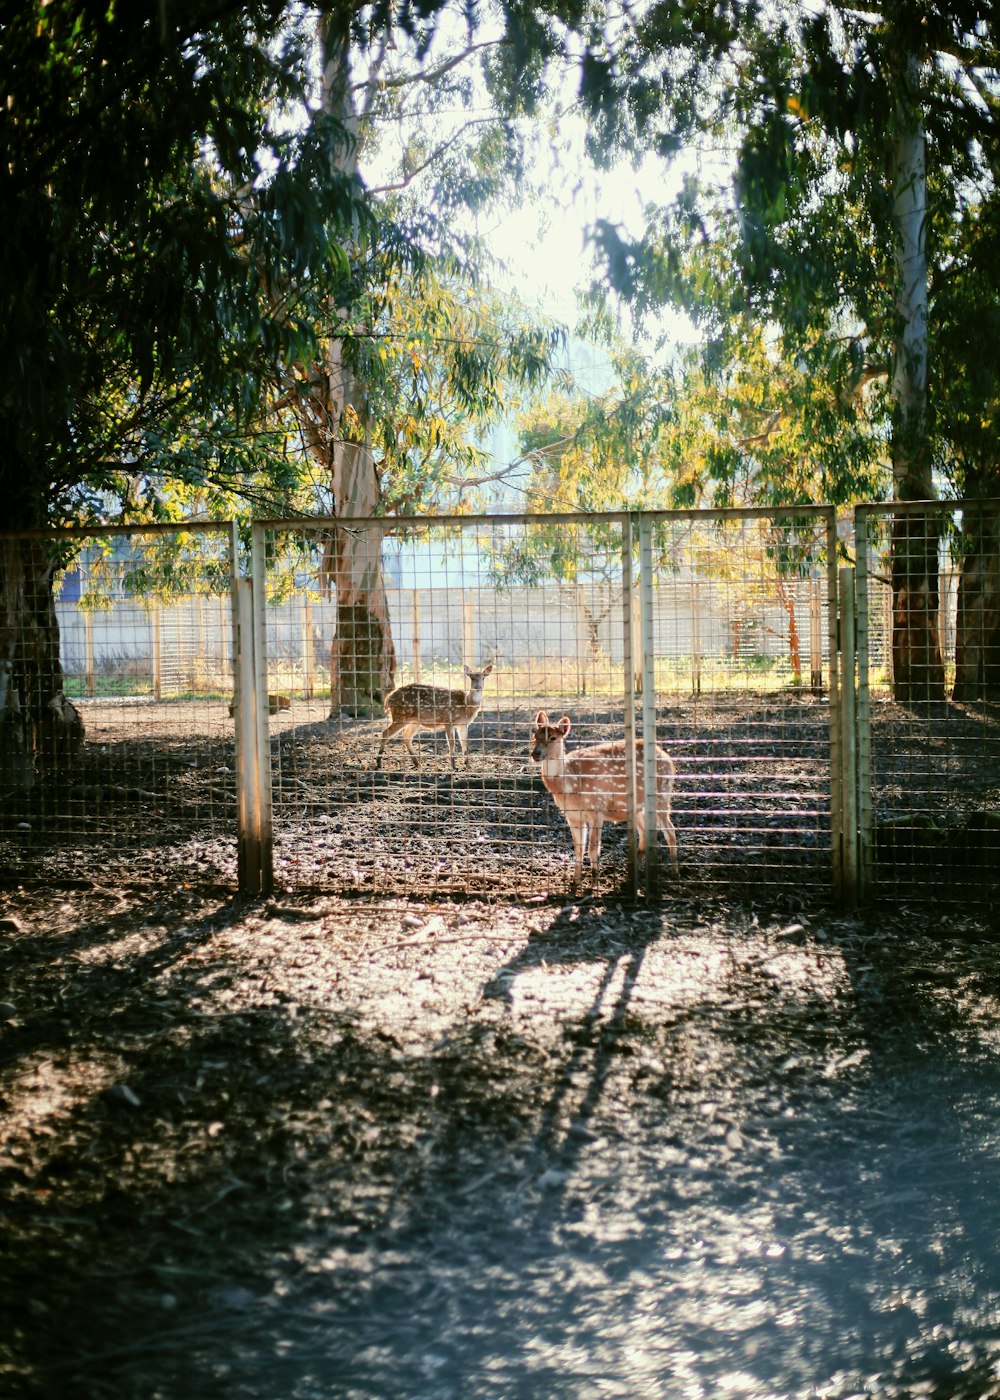 a couple of deer standing in a fenced in area